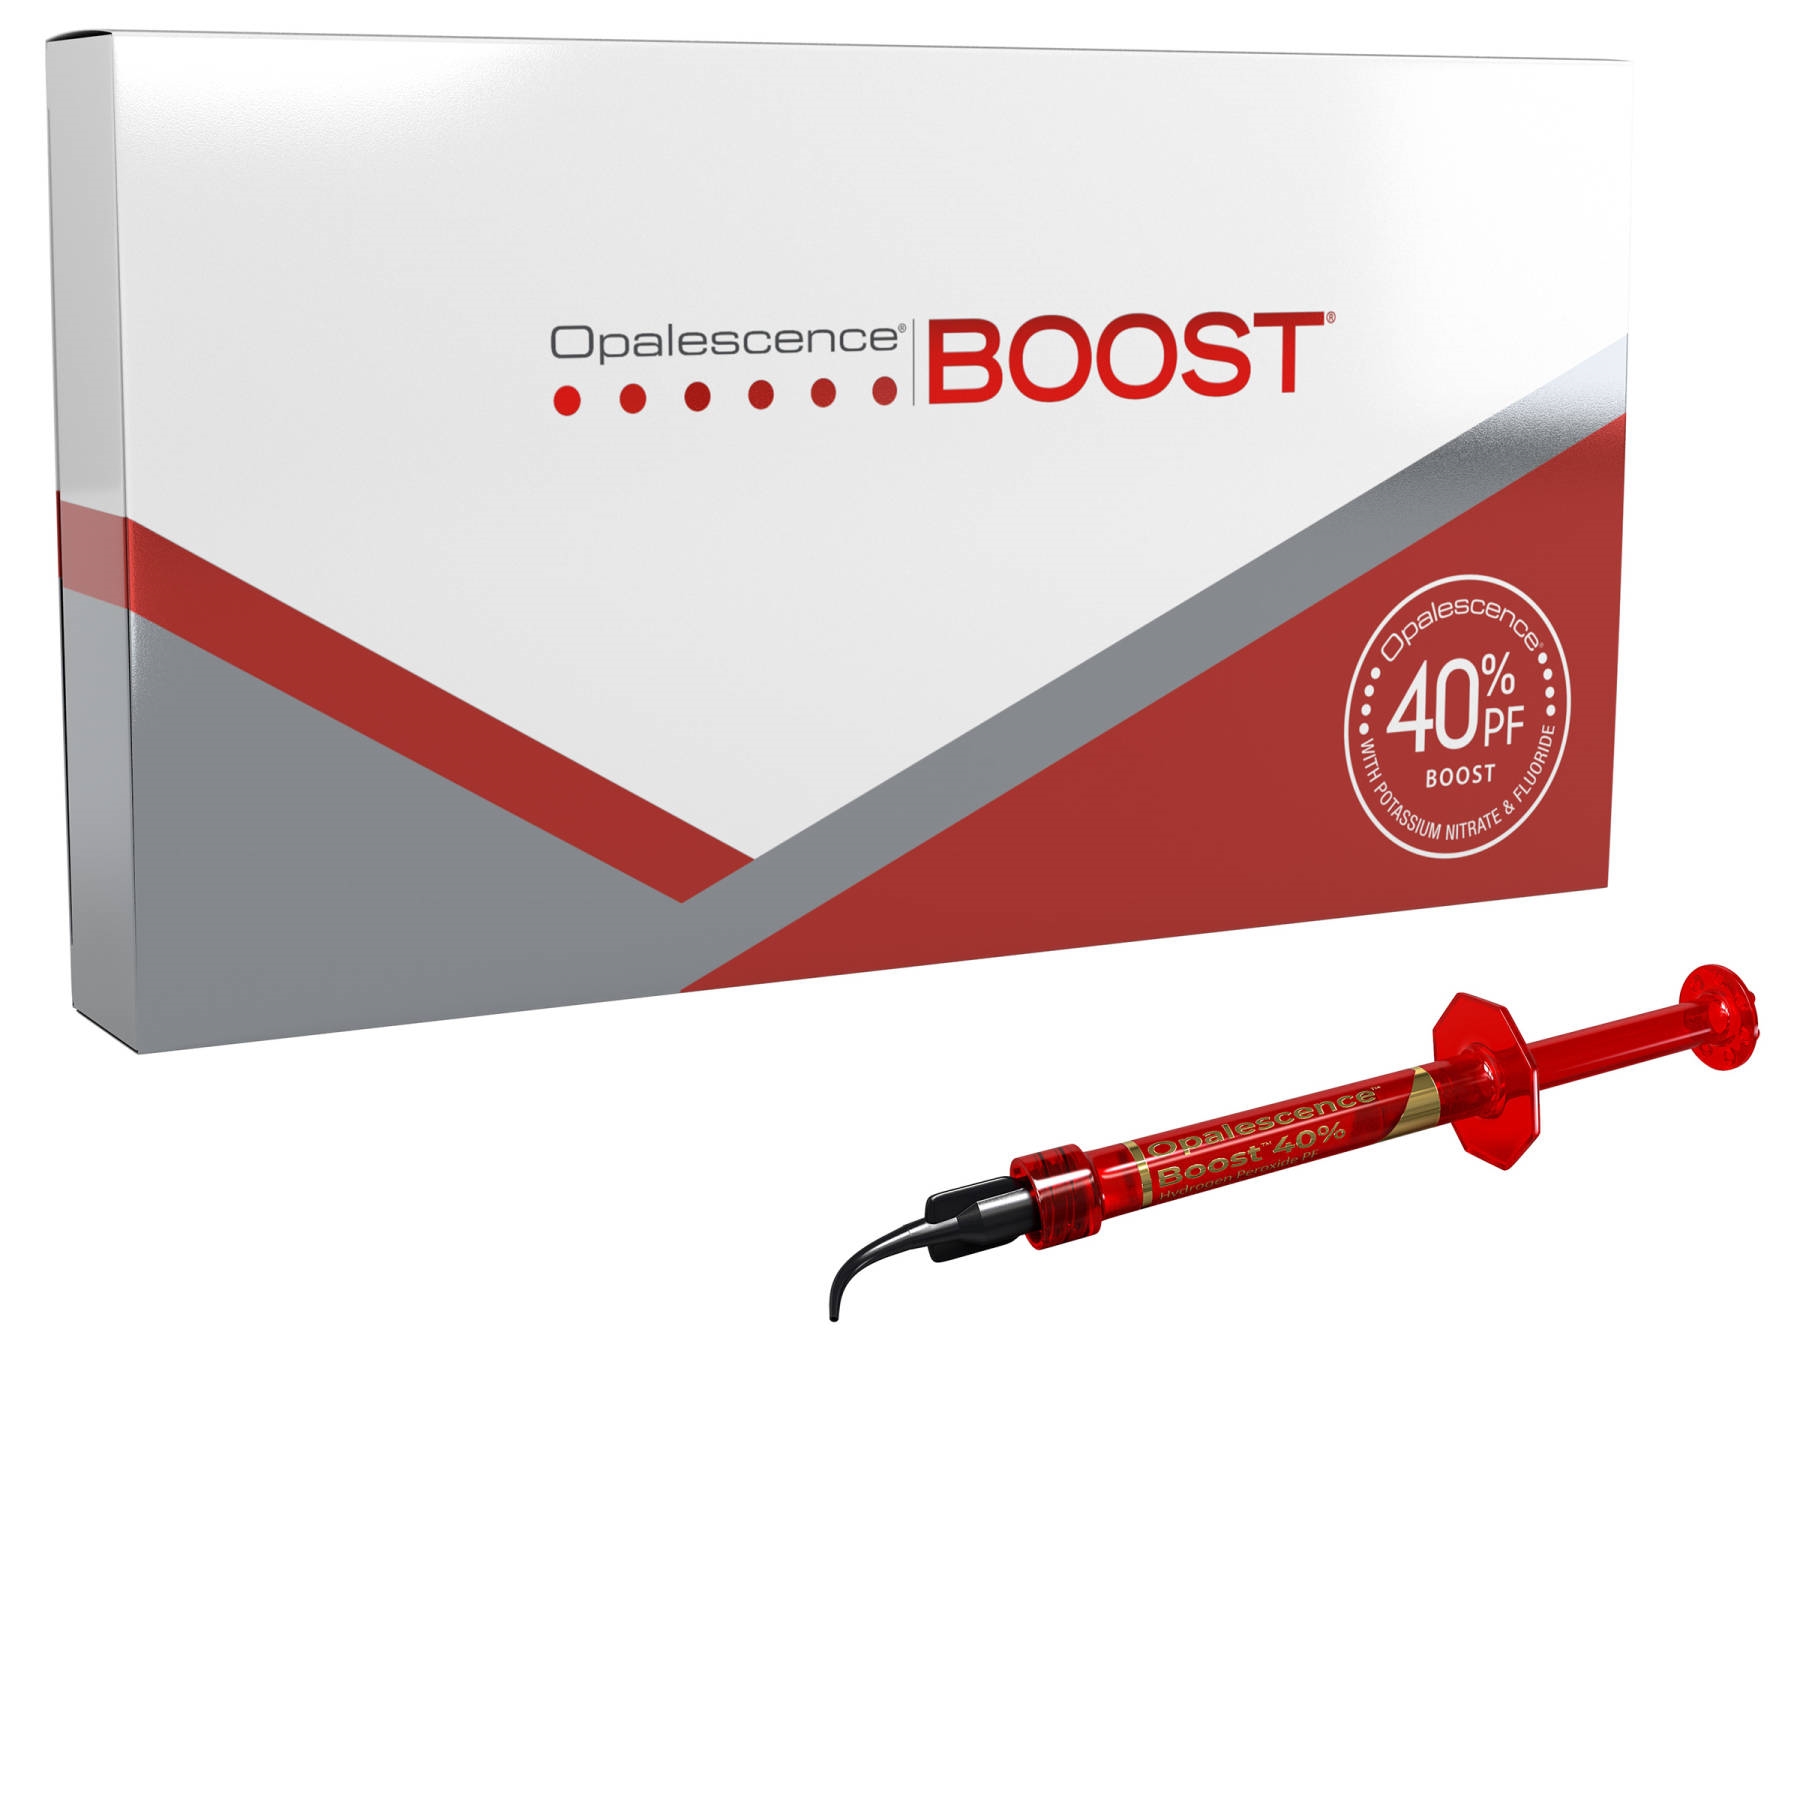 OPALESCENCE BOOST 40% - 4750 Intro Kit